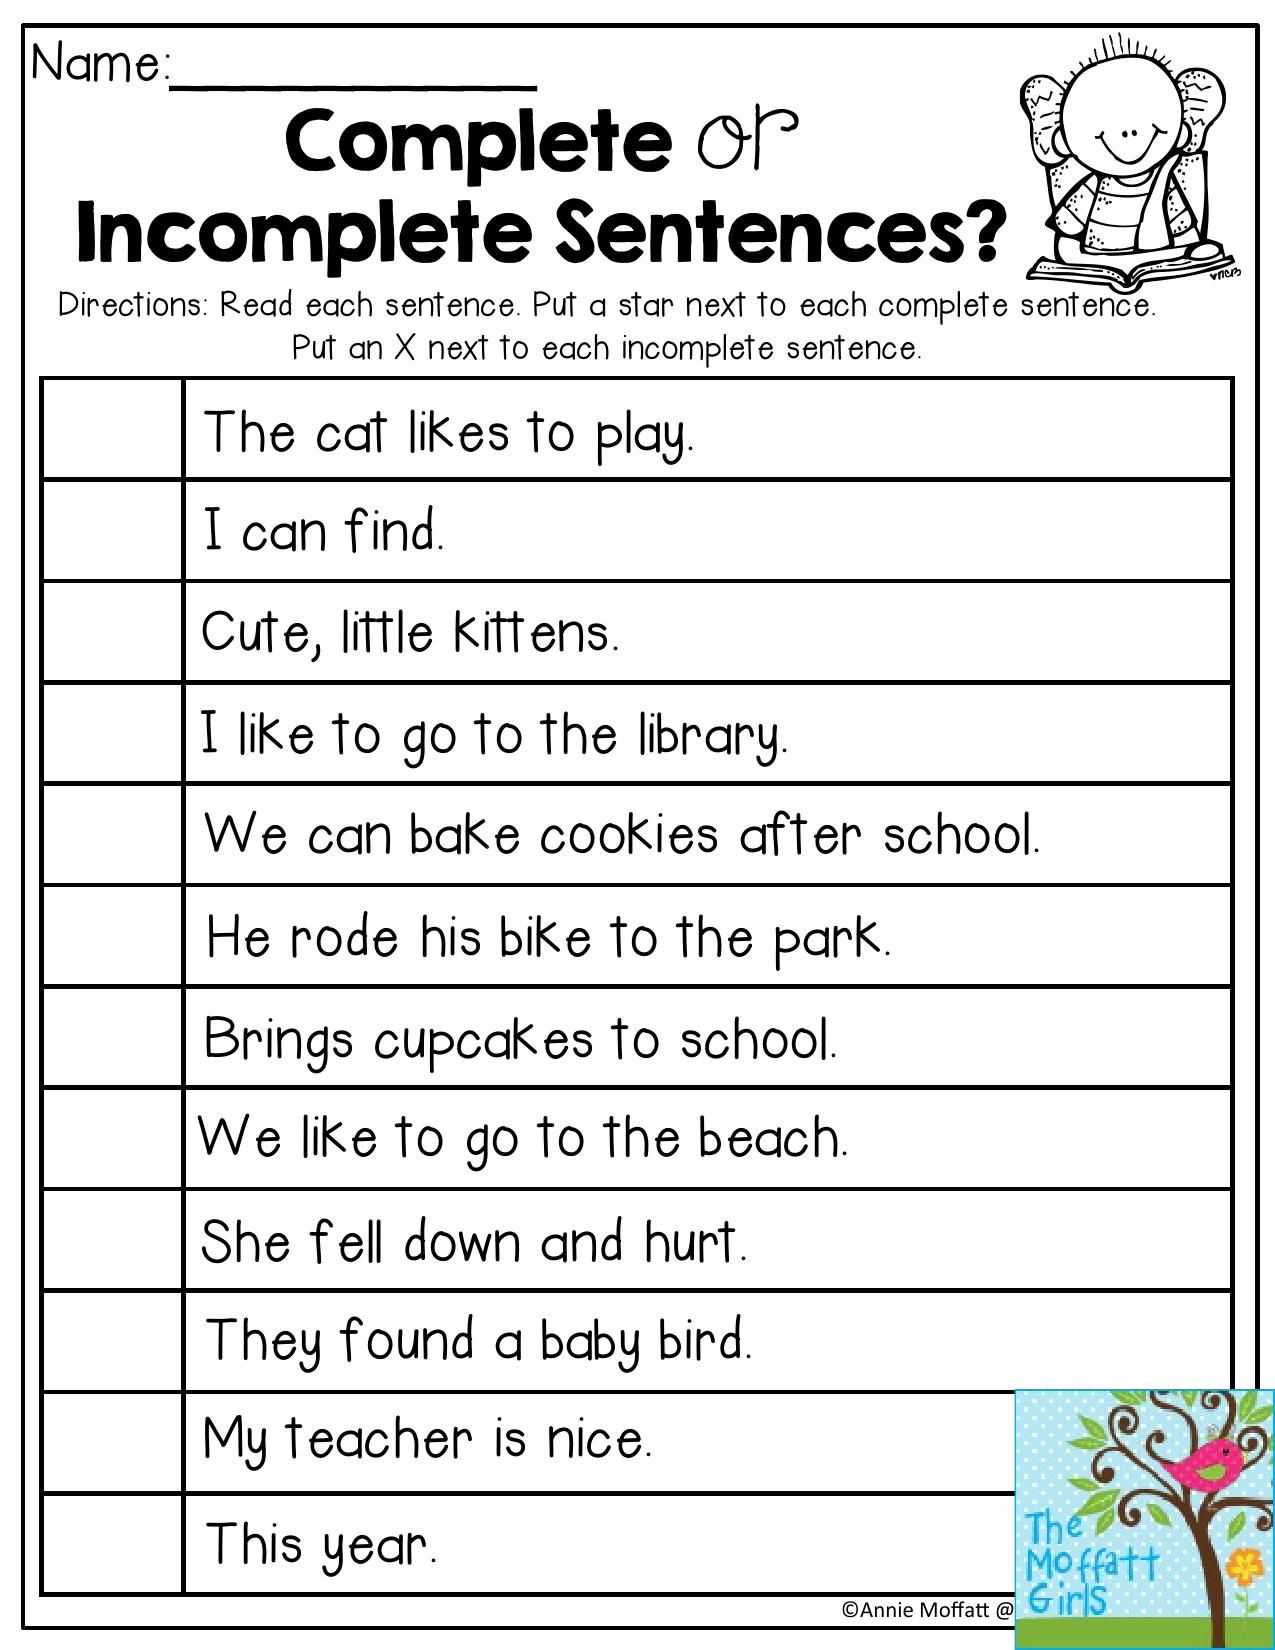 Free Sentence Scramble Worksheets and Plete or In Plete Sentences Read Each Sentence and Decide if